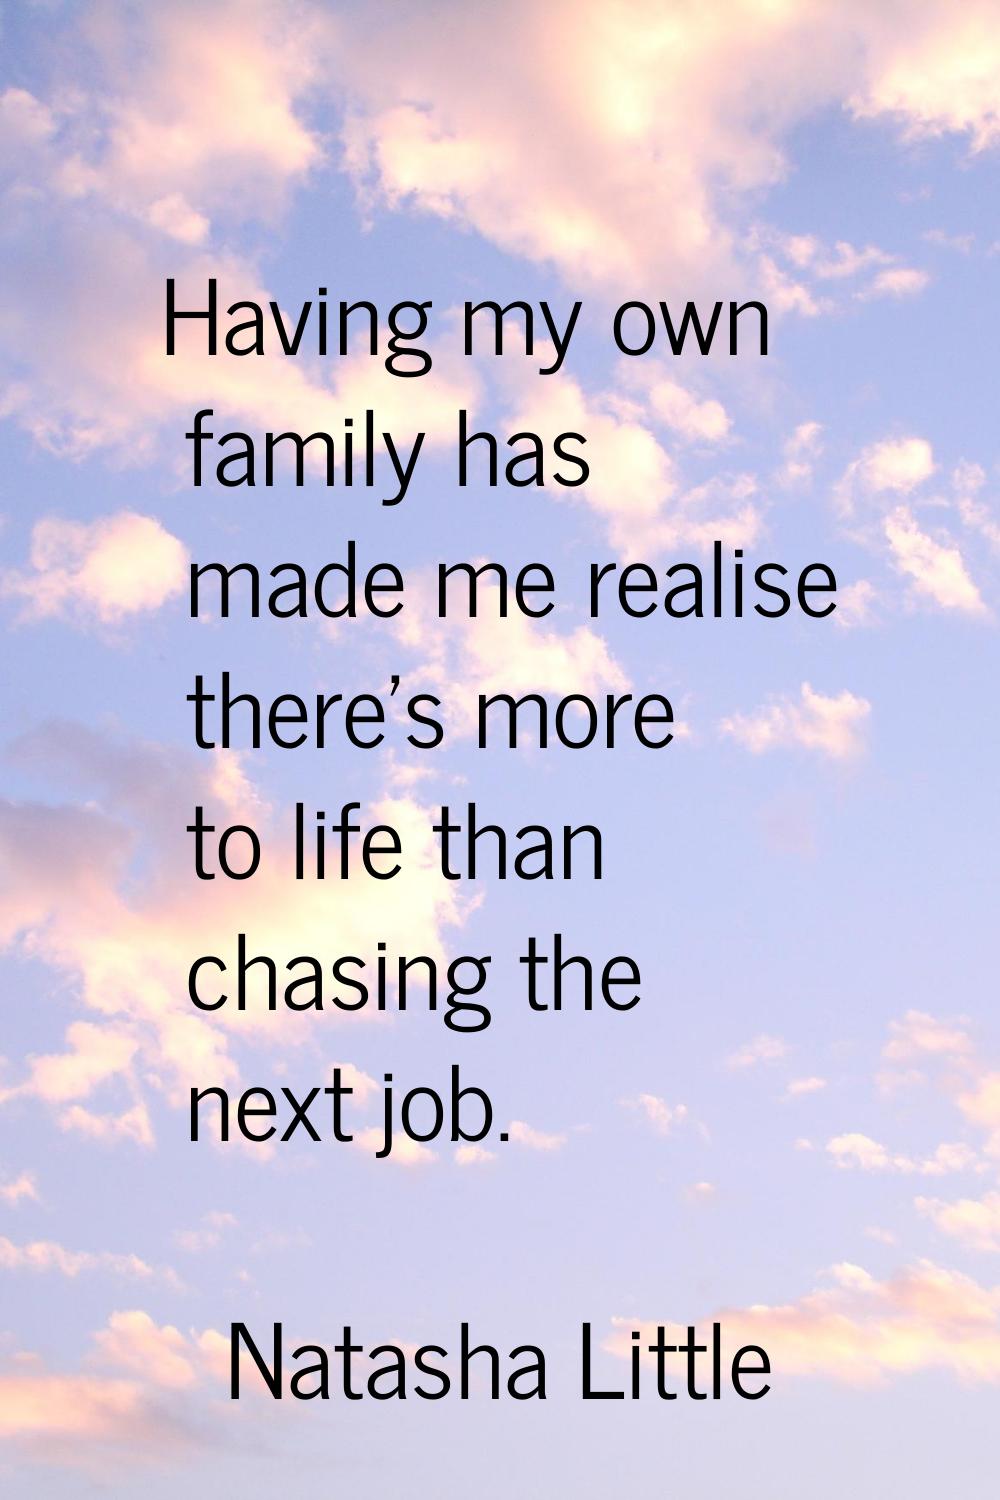 Having my own family has made me realise there's more to life than chasing the next job.